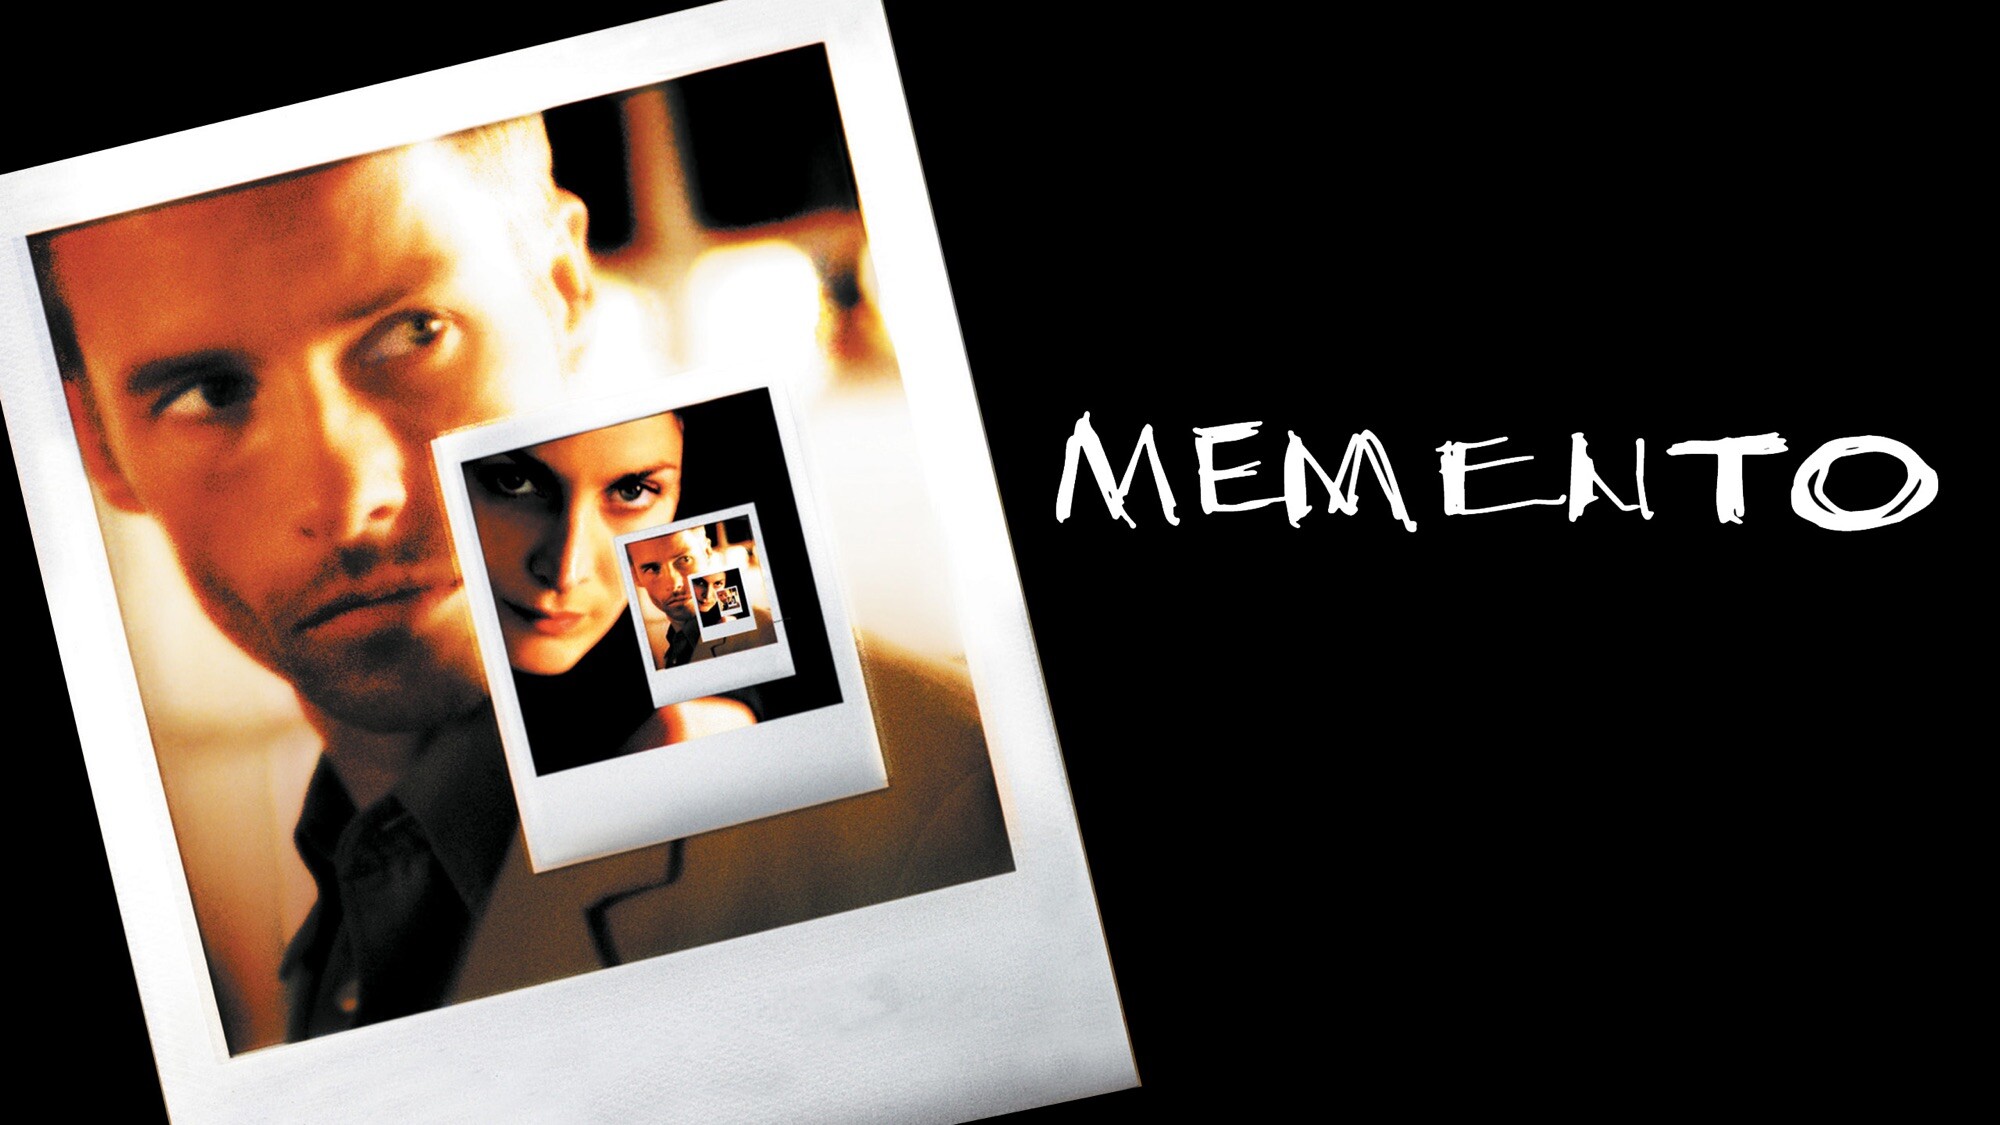 Memento: Produced by Suzanne and Jennifer Todd, Based on "Memento Mori" by Jonathan Nolan. 2000x1130 HD Background.